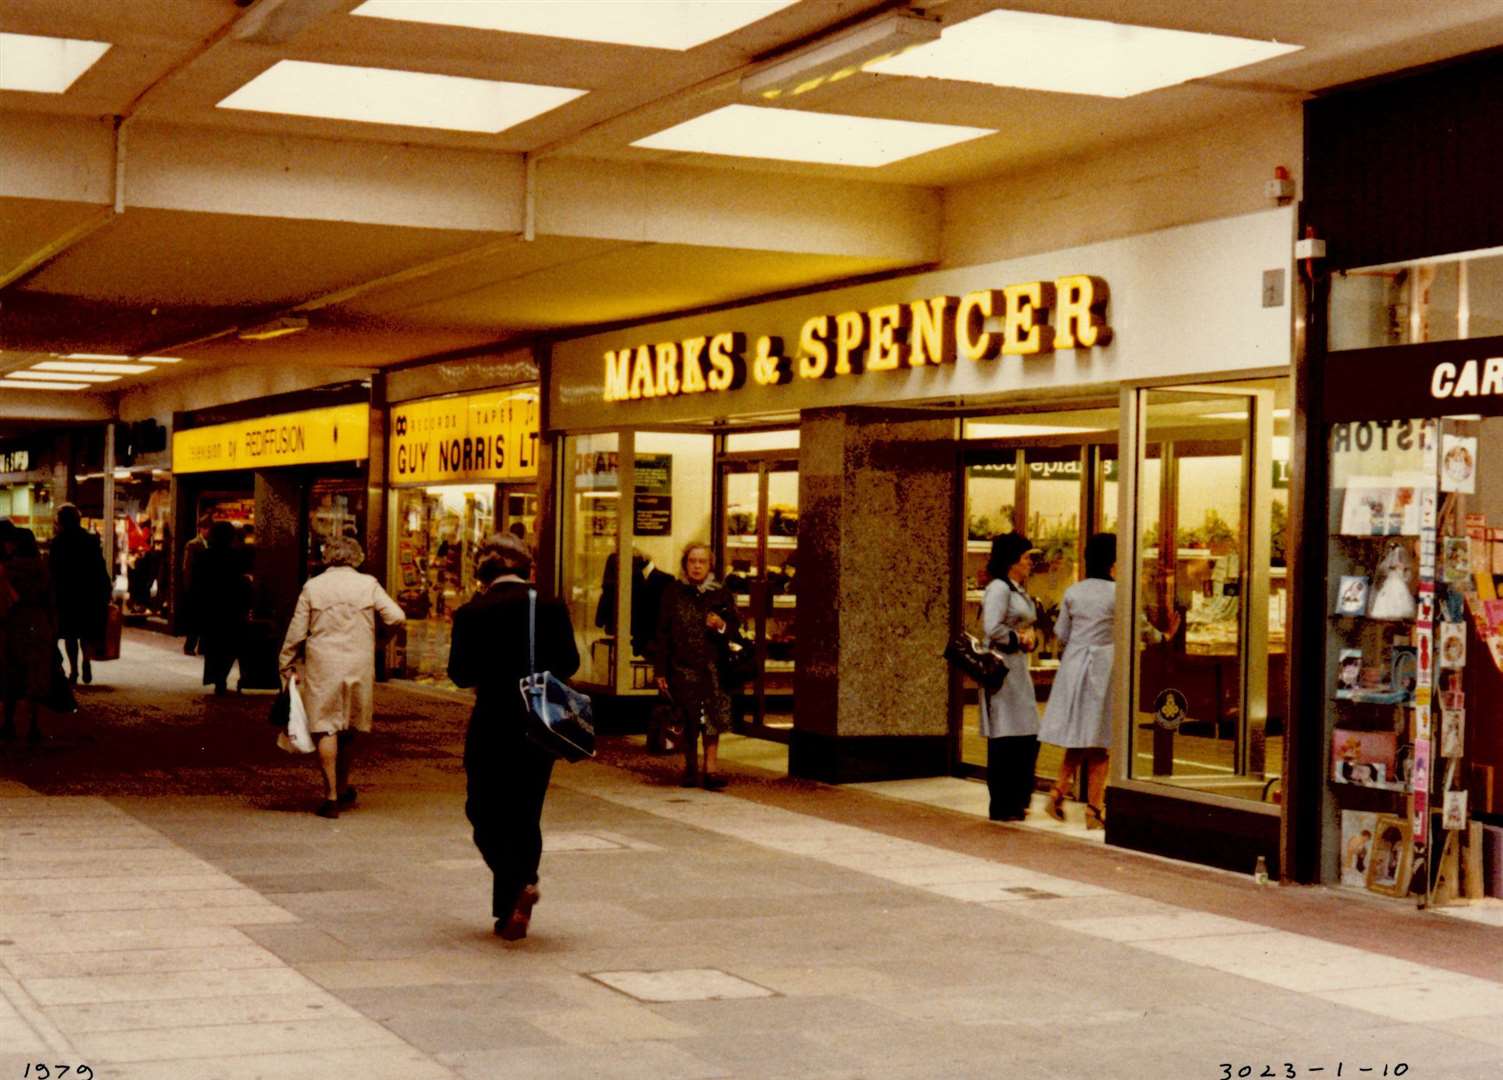 The Tufton Centre branch of Marks & Spencer on its opening day in 1979. Picture: M&S Archive/Steve Salter